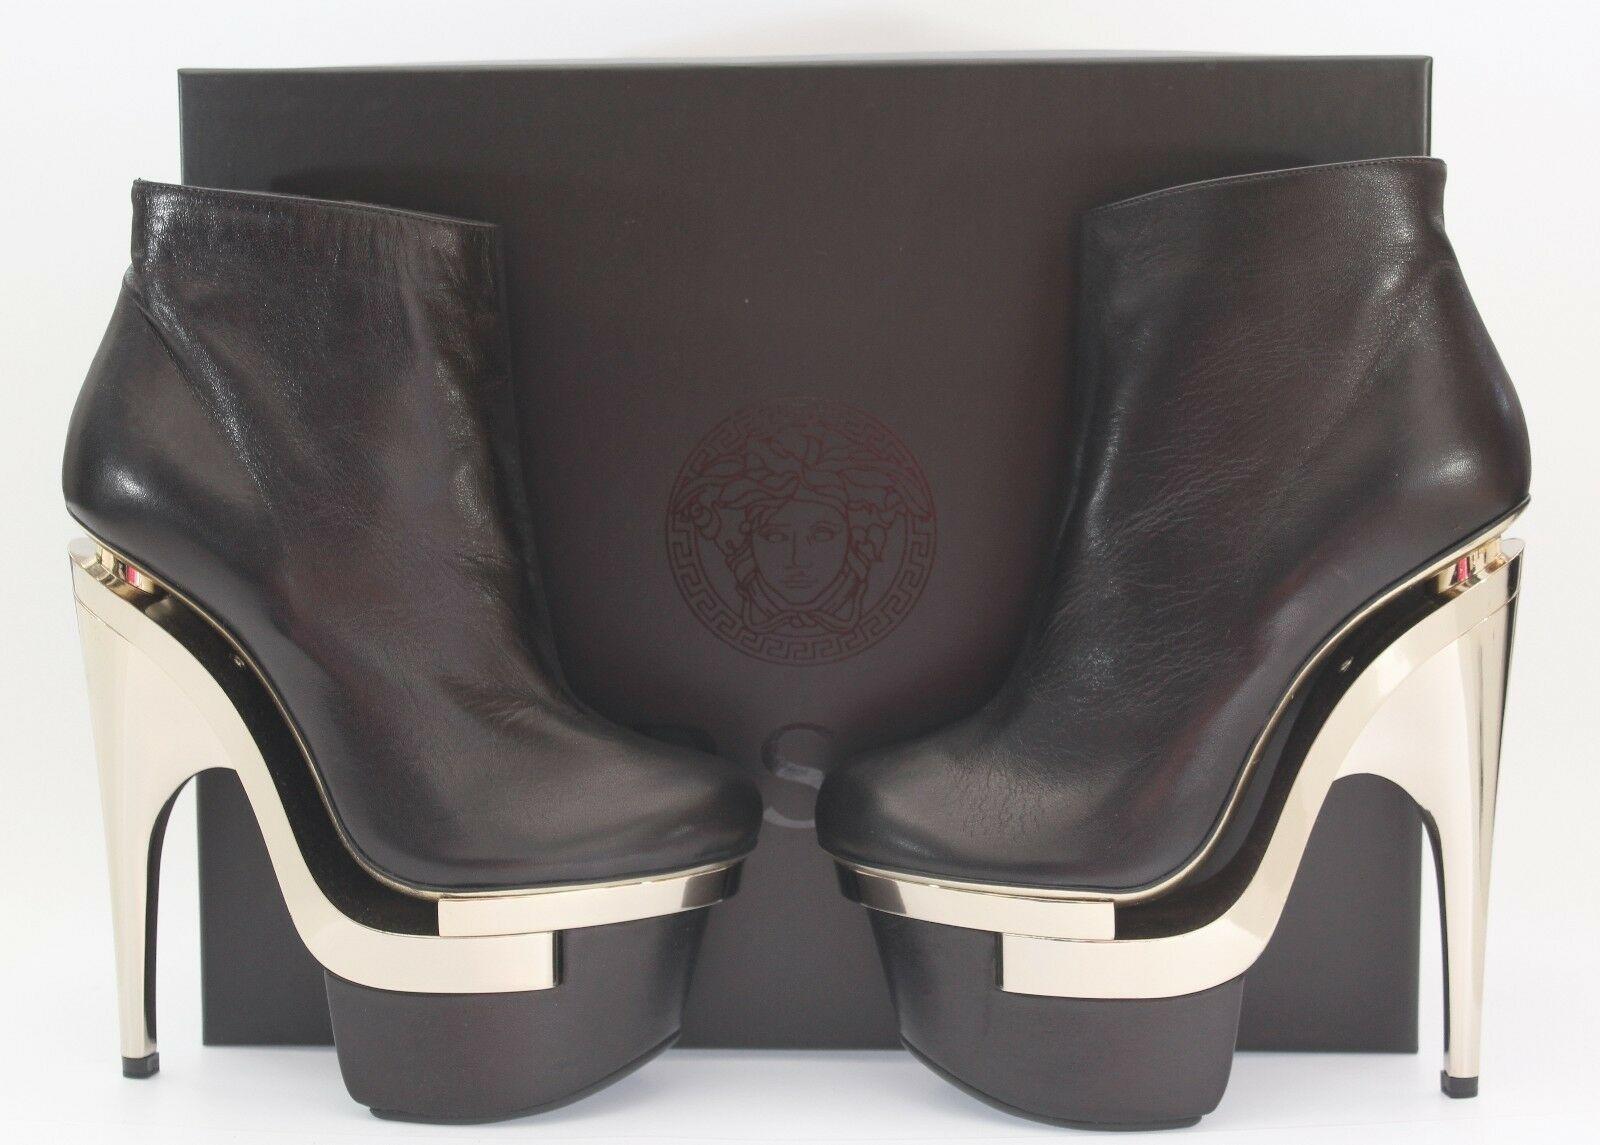 VERSACE BOOTS

Nappa leather upper with leather sole

Approx 180mm/ 7 inch  gold metal heel

Approx 75mm/ 3 inch gold metal and leather platform

Side zip closure with Greek Key zipper pull.

Content: 100% leather




IT Size 35.5  - US 5.5
insole 8